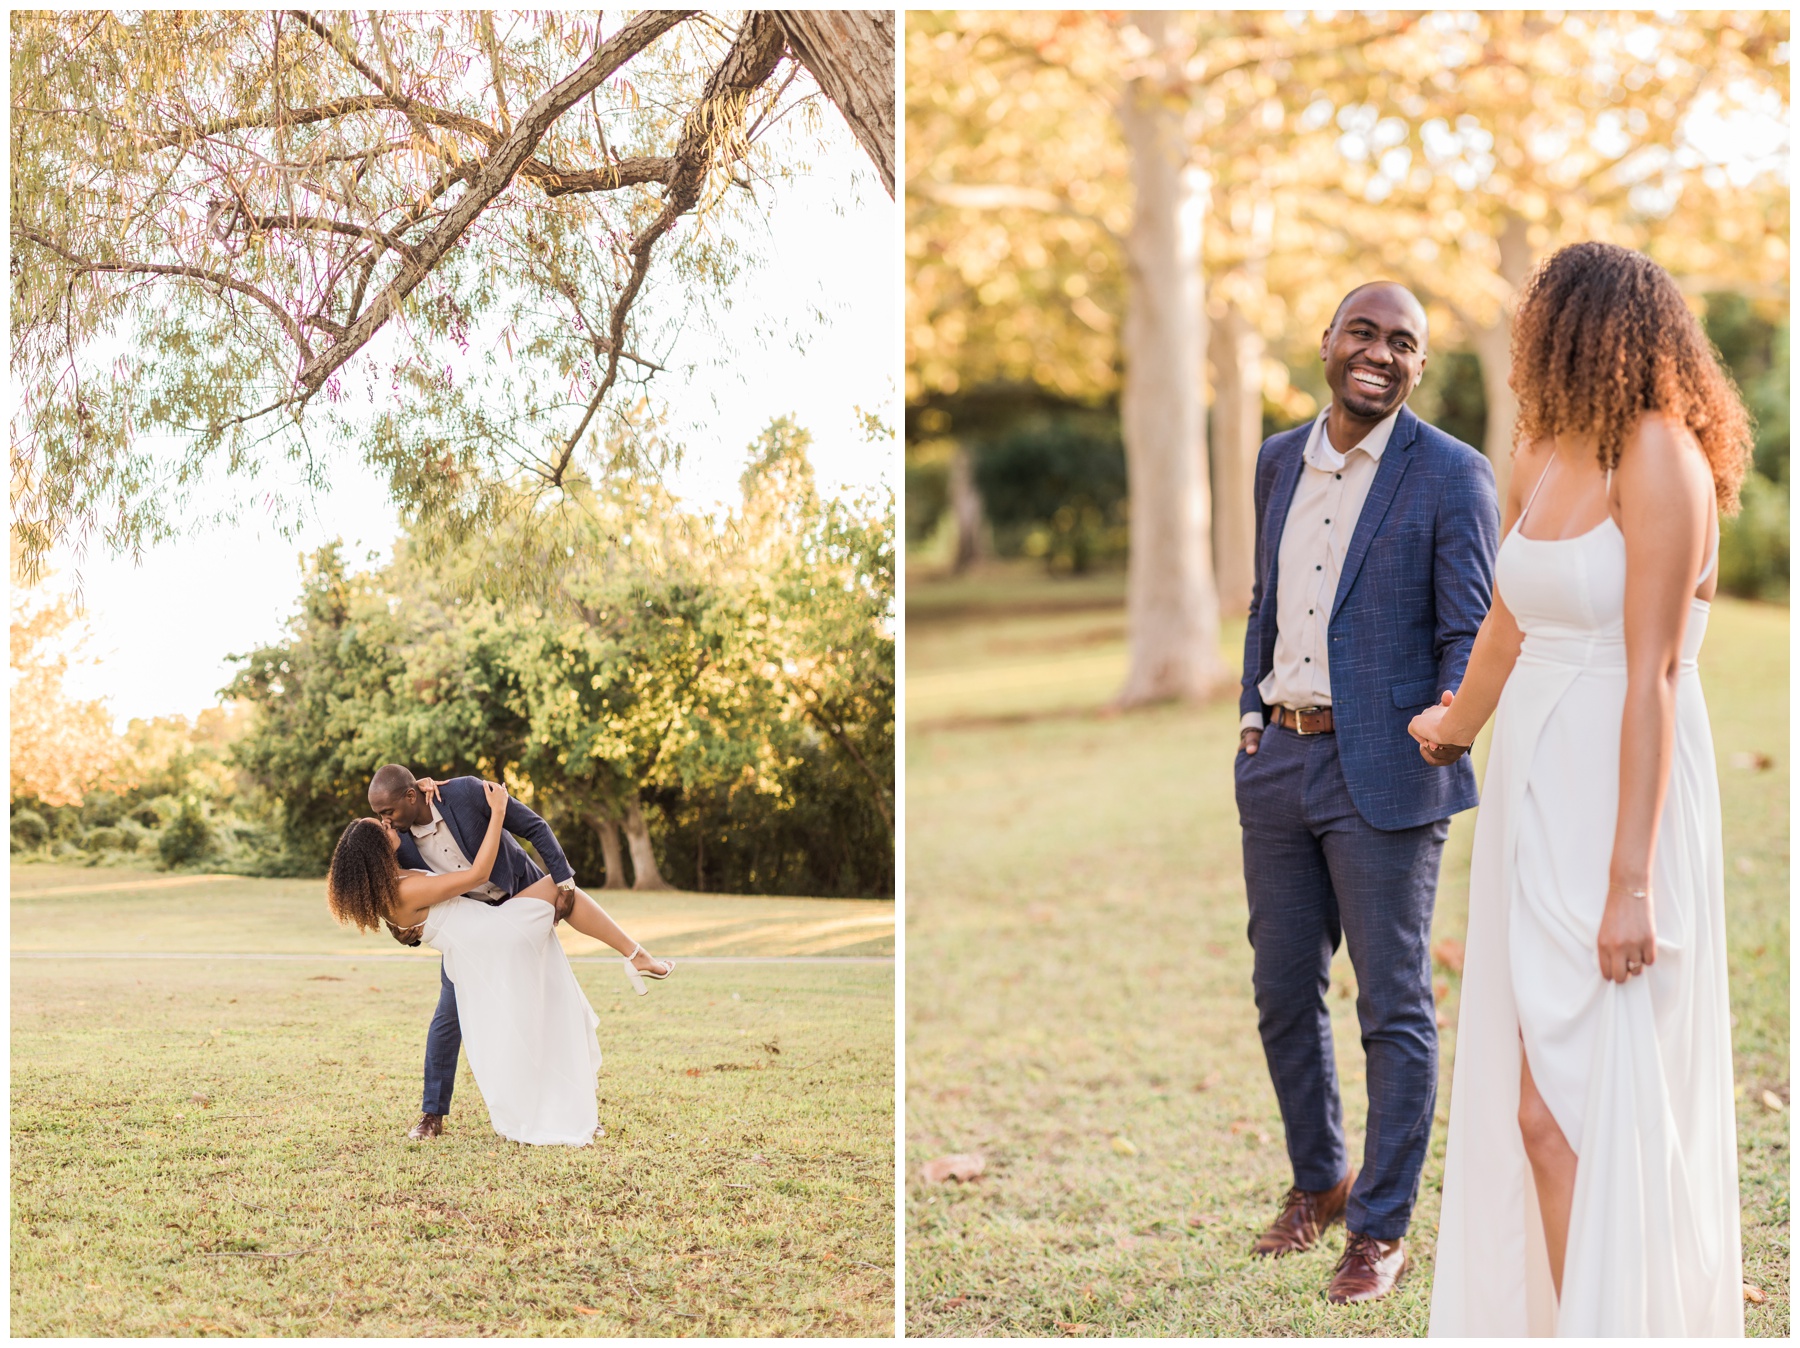 Outdoor engagement session in a park at golden hour